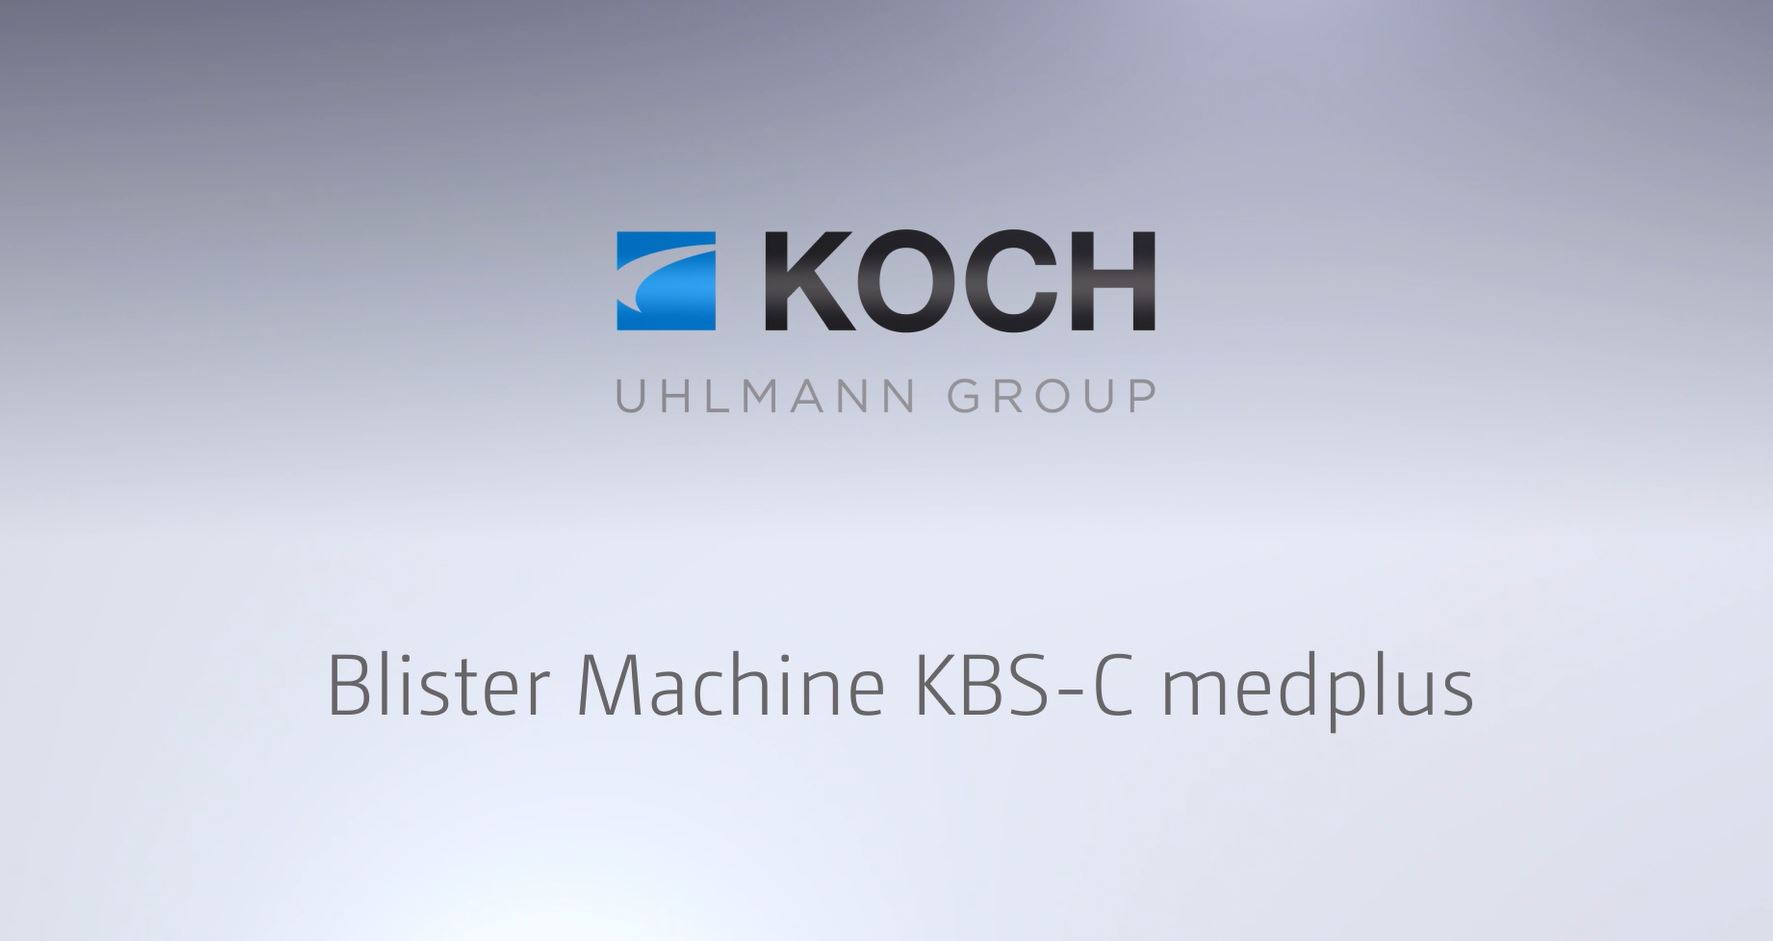 Our new Blister Machine KBS-C medplus with an innovative technique